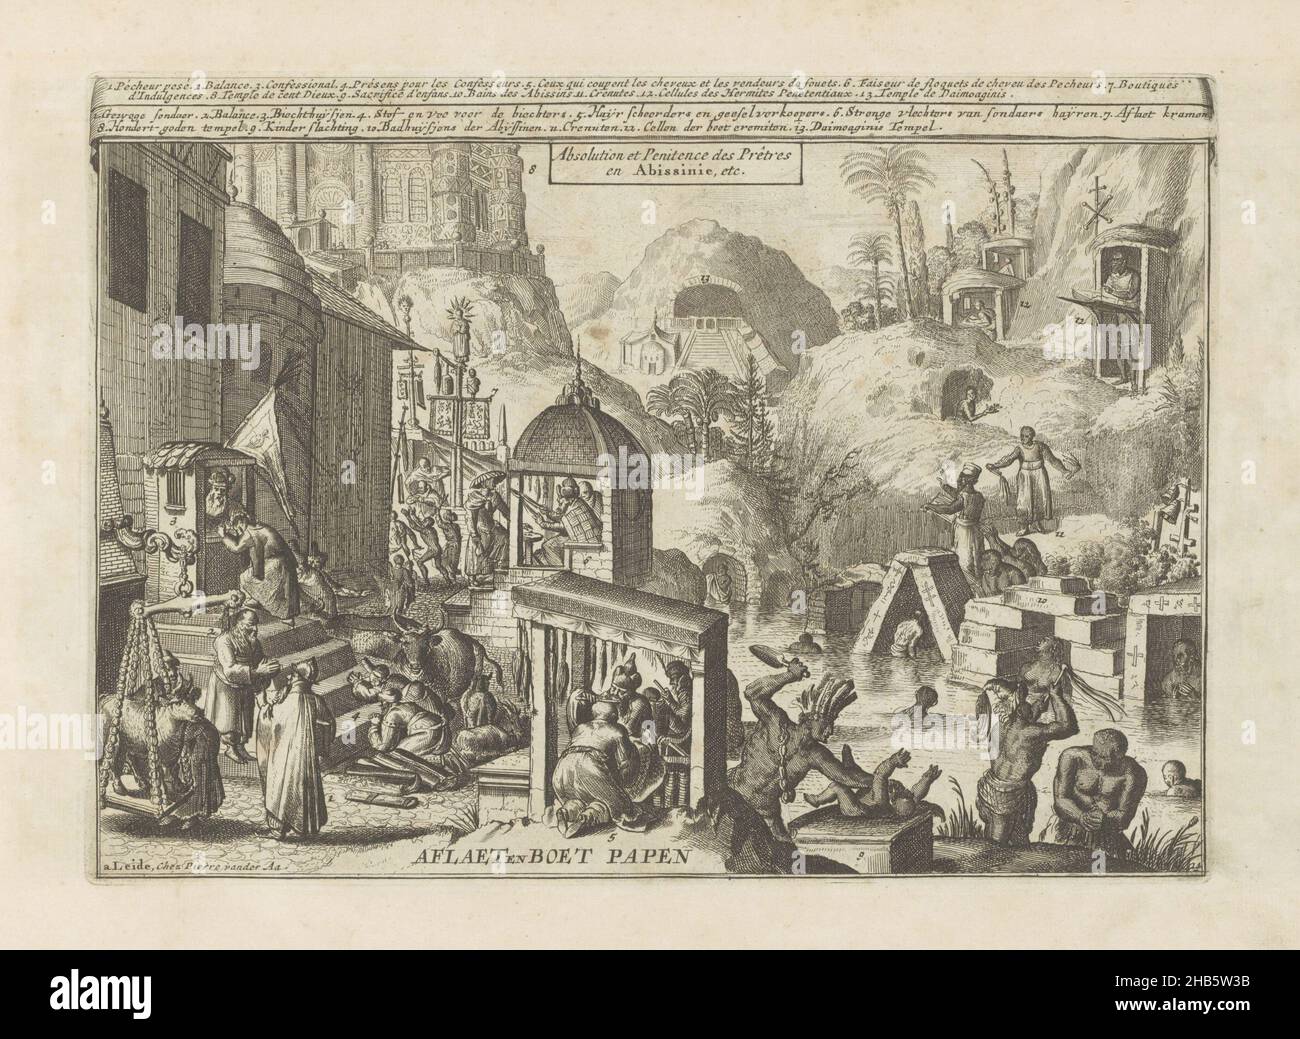 Sin and Penance, Aflaet and Boet Papen, Absolution et Penitence des Prêtres en Abissinie, etc. (title on object), Les Indes Orientales et Occidentales et autres lieux (series title), Landscape with aspects on sin and penance. On the far left, a sinner is weighed near a staircase with a confessional on top. In the foreground near a stall with scourges, a man has his hair shaved off. The hair of sinners is being braided. To the right of the scene a child is being slaughtered and men are hurting themselves with a scourge. In the background are several hermits. With a legend in Dutch and French Stock Photo